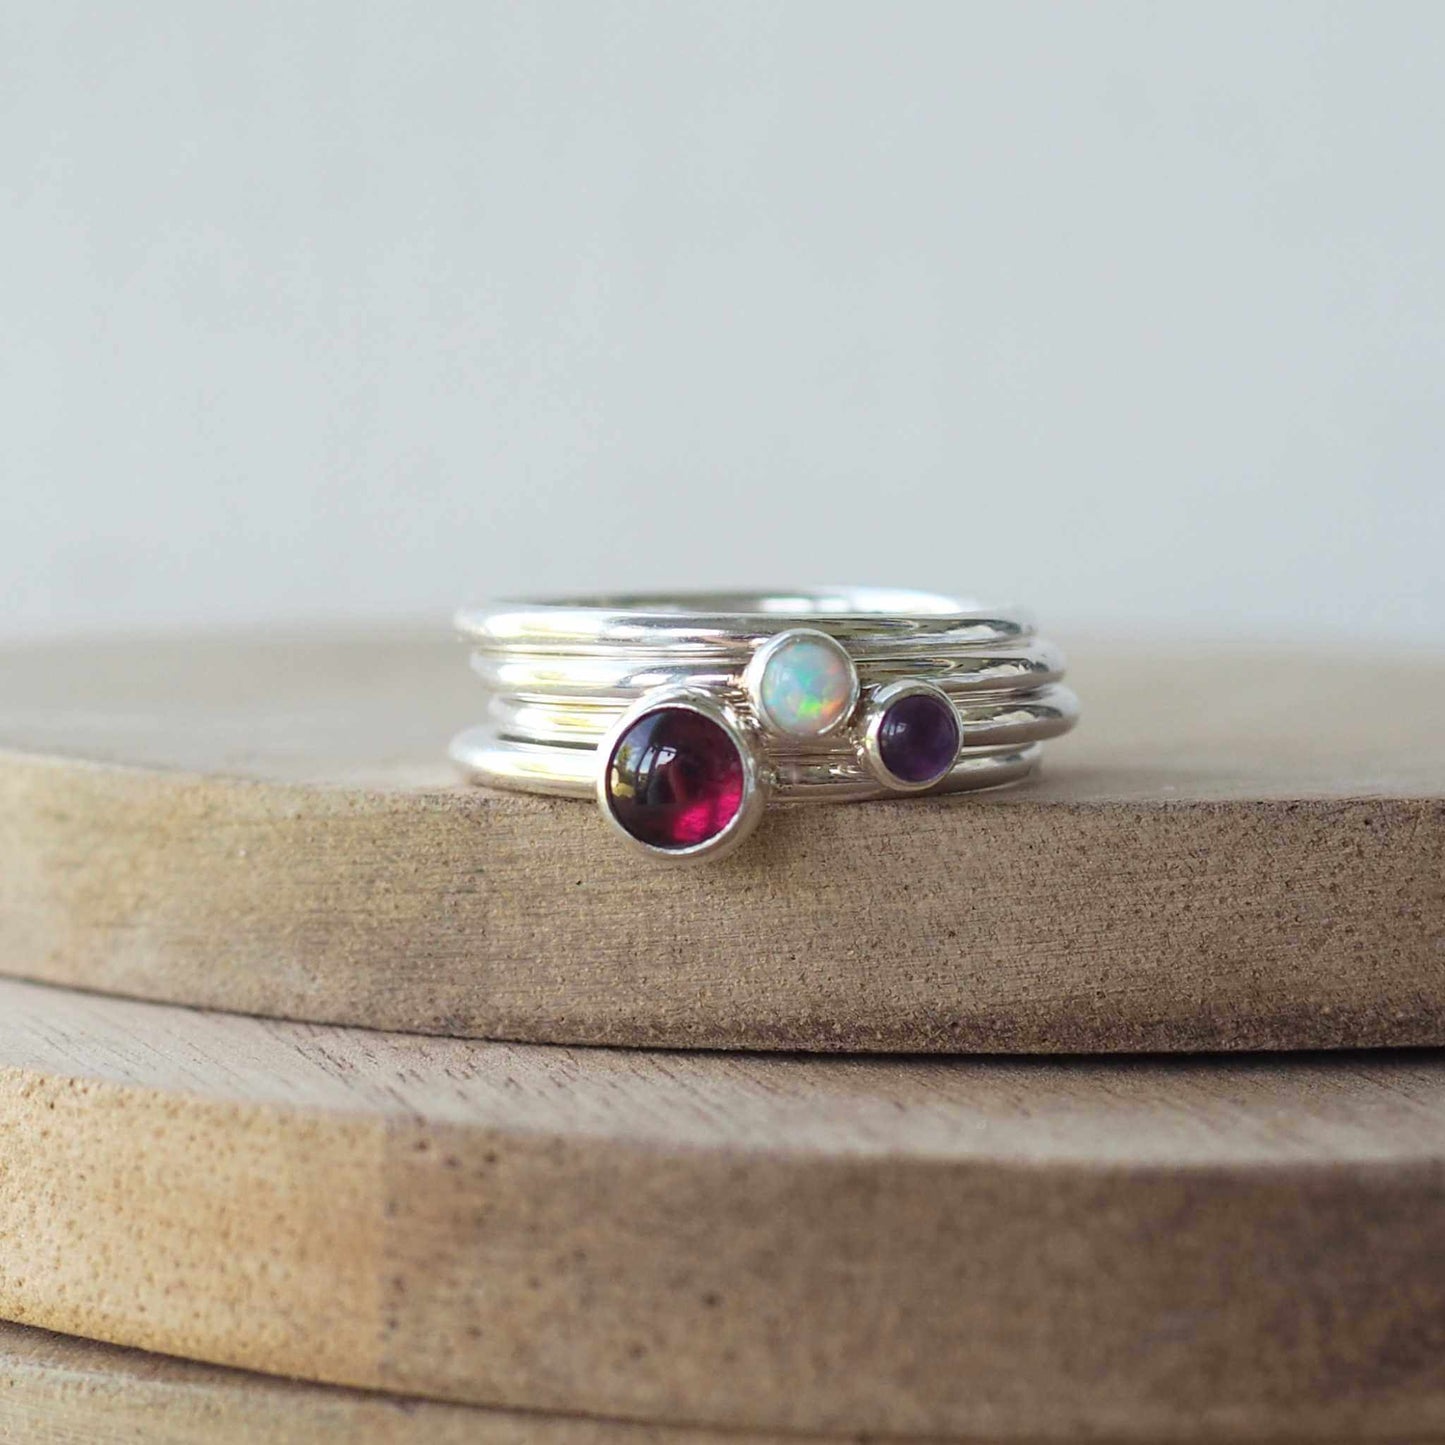 Garnet, Amethyst and Lab Opal Silver Triple Ring Set. Made from three rings in Sterling silver each with a different birthstone.Handmade in Scotland by maram jewellery